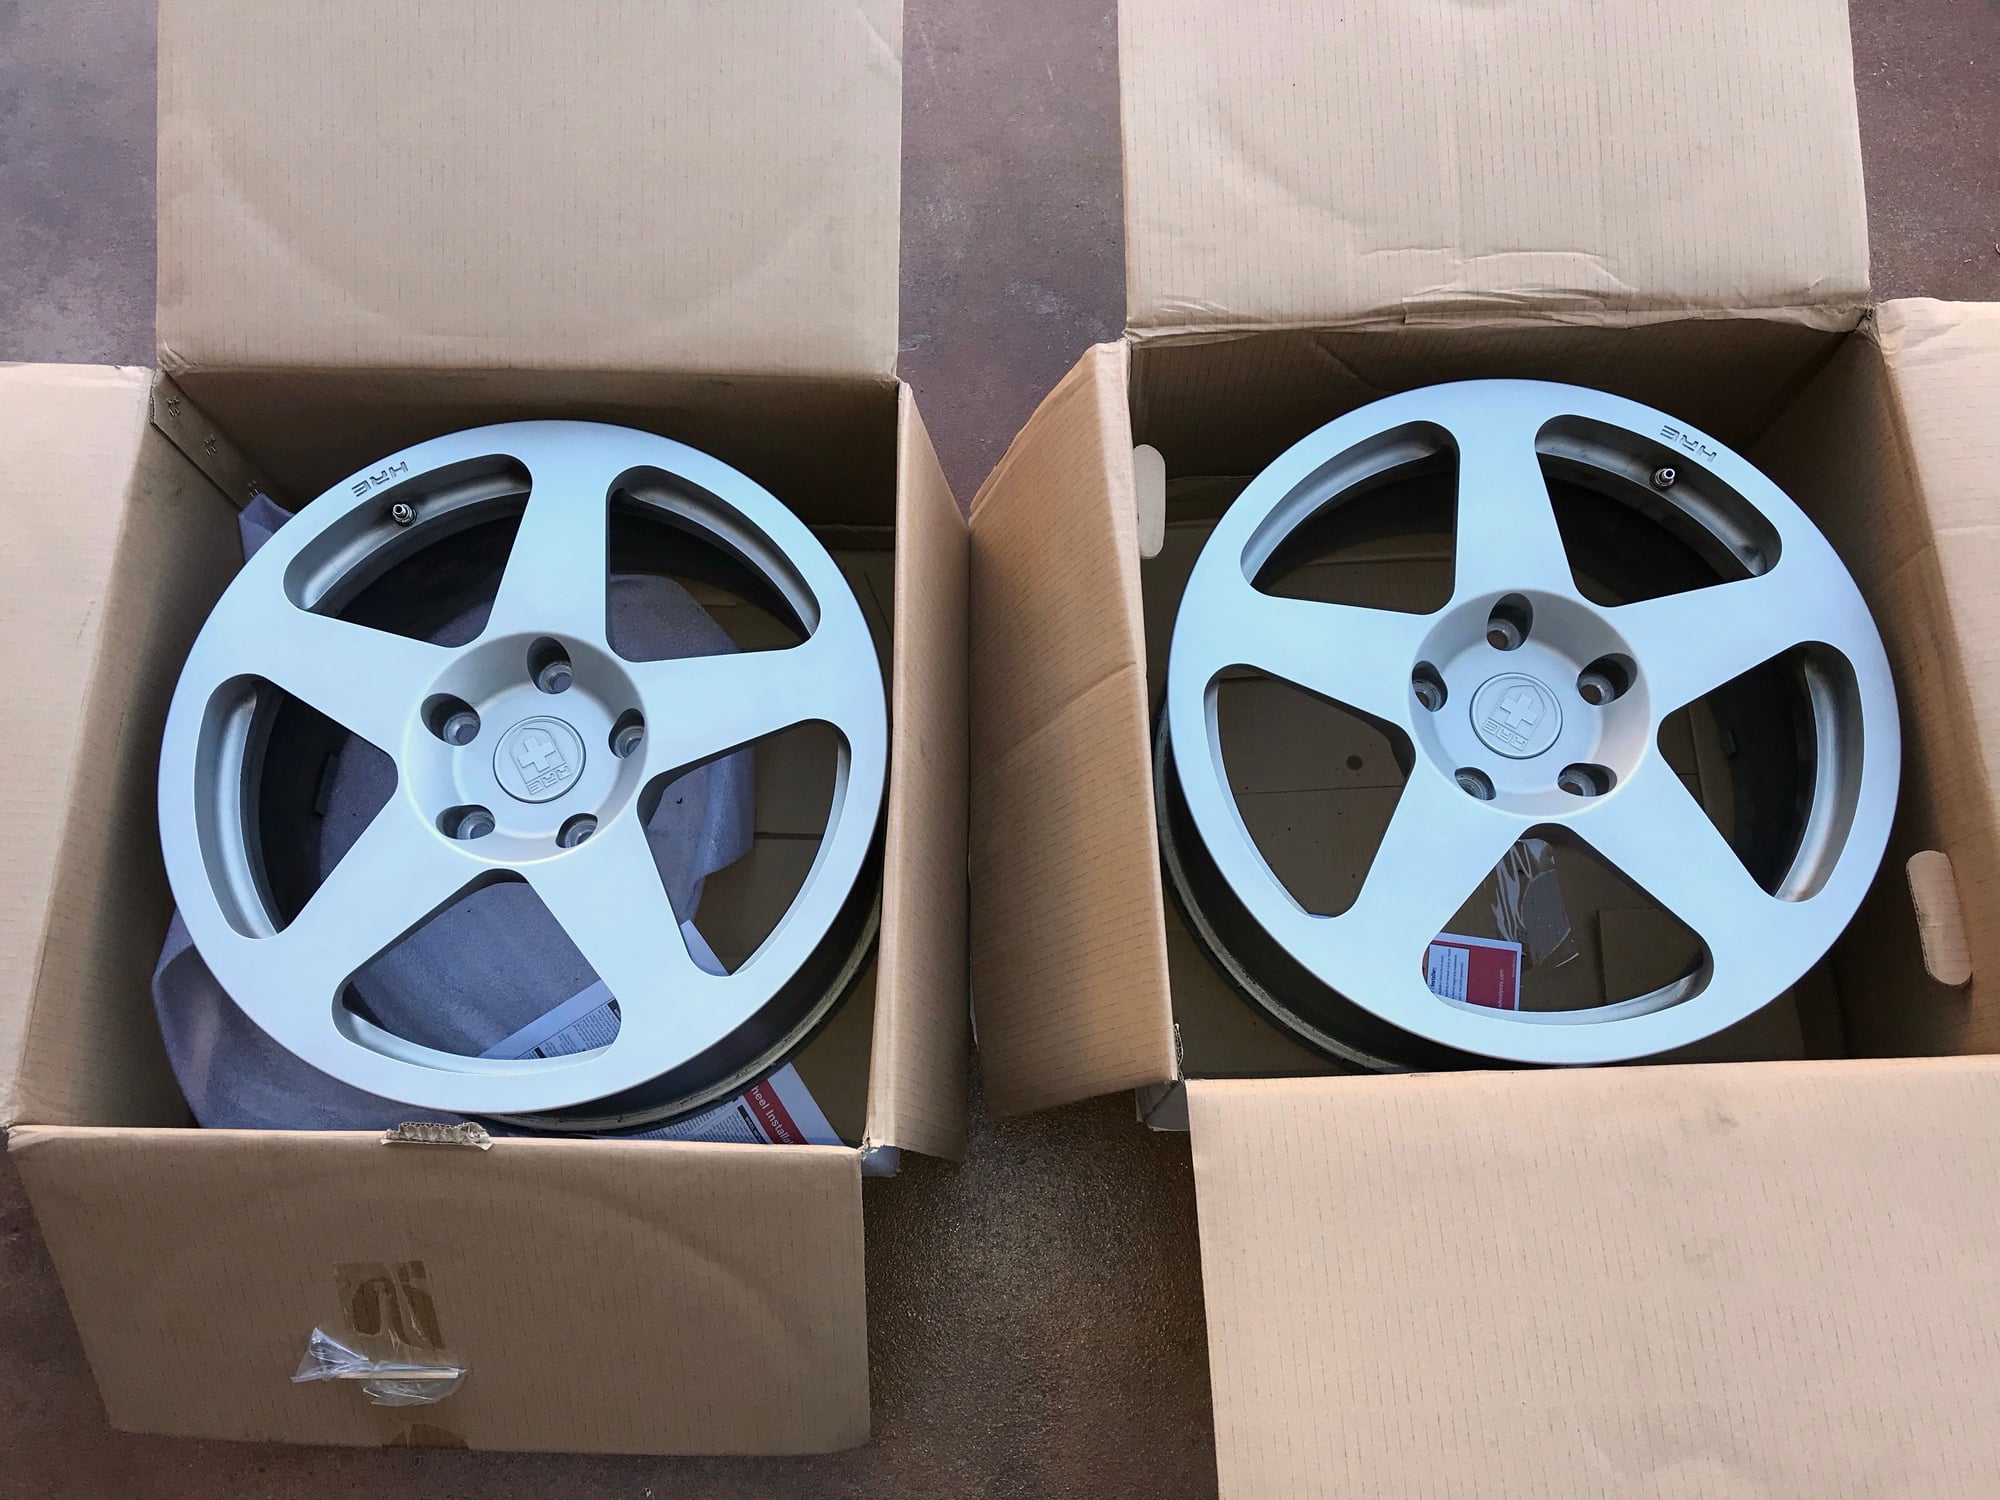 Wheels and Tires/Axles - FS: Wheels: 4 @ HRE 305M ( 2 @ 18x8 & 2 @ 18x10) from 996 - $3500 obo - Used - 1994 to 2012 Porsche 911 - Austin, TX 78641, United States